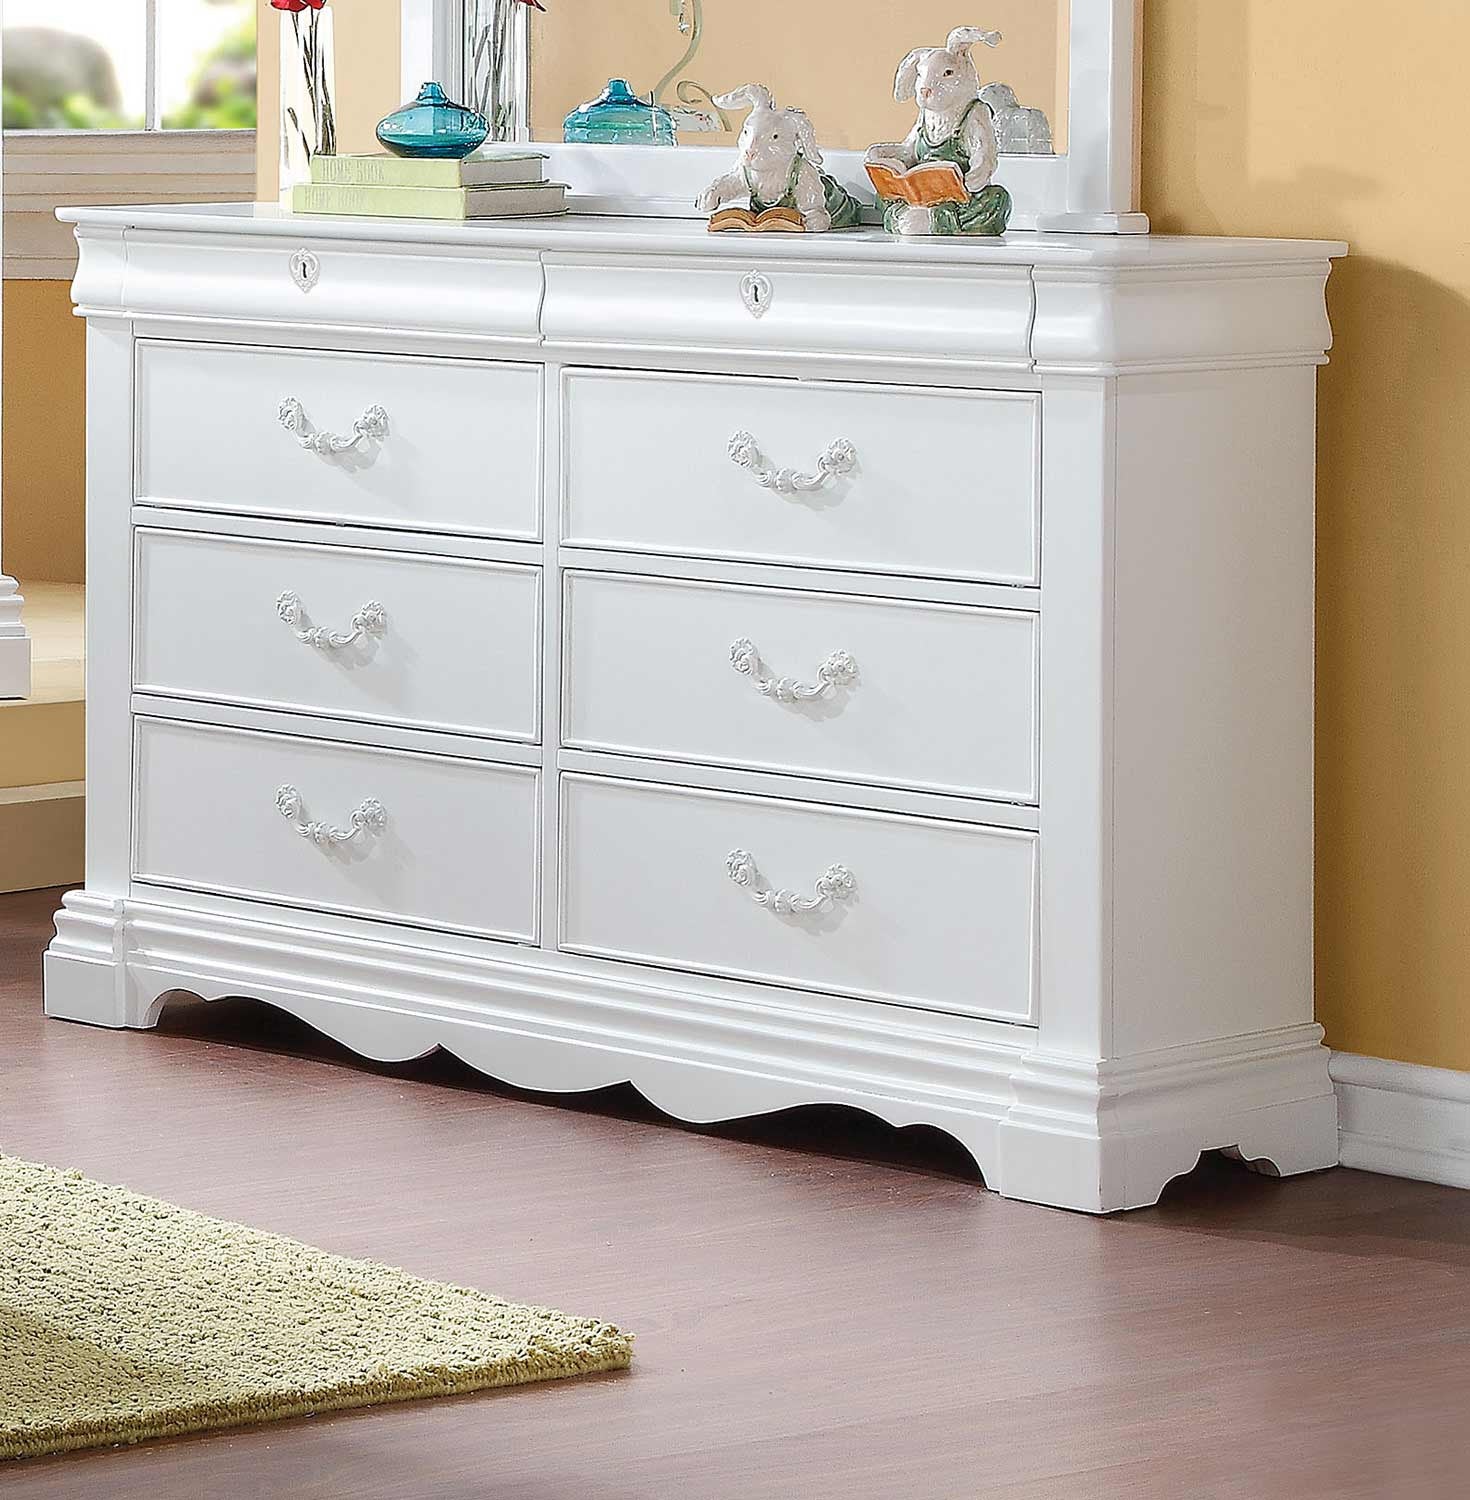 56" White Solid Wood Eight Drawer Double Dresser